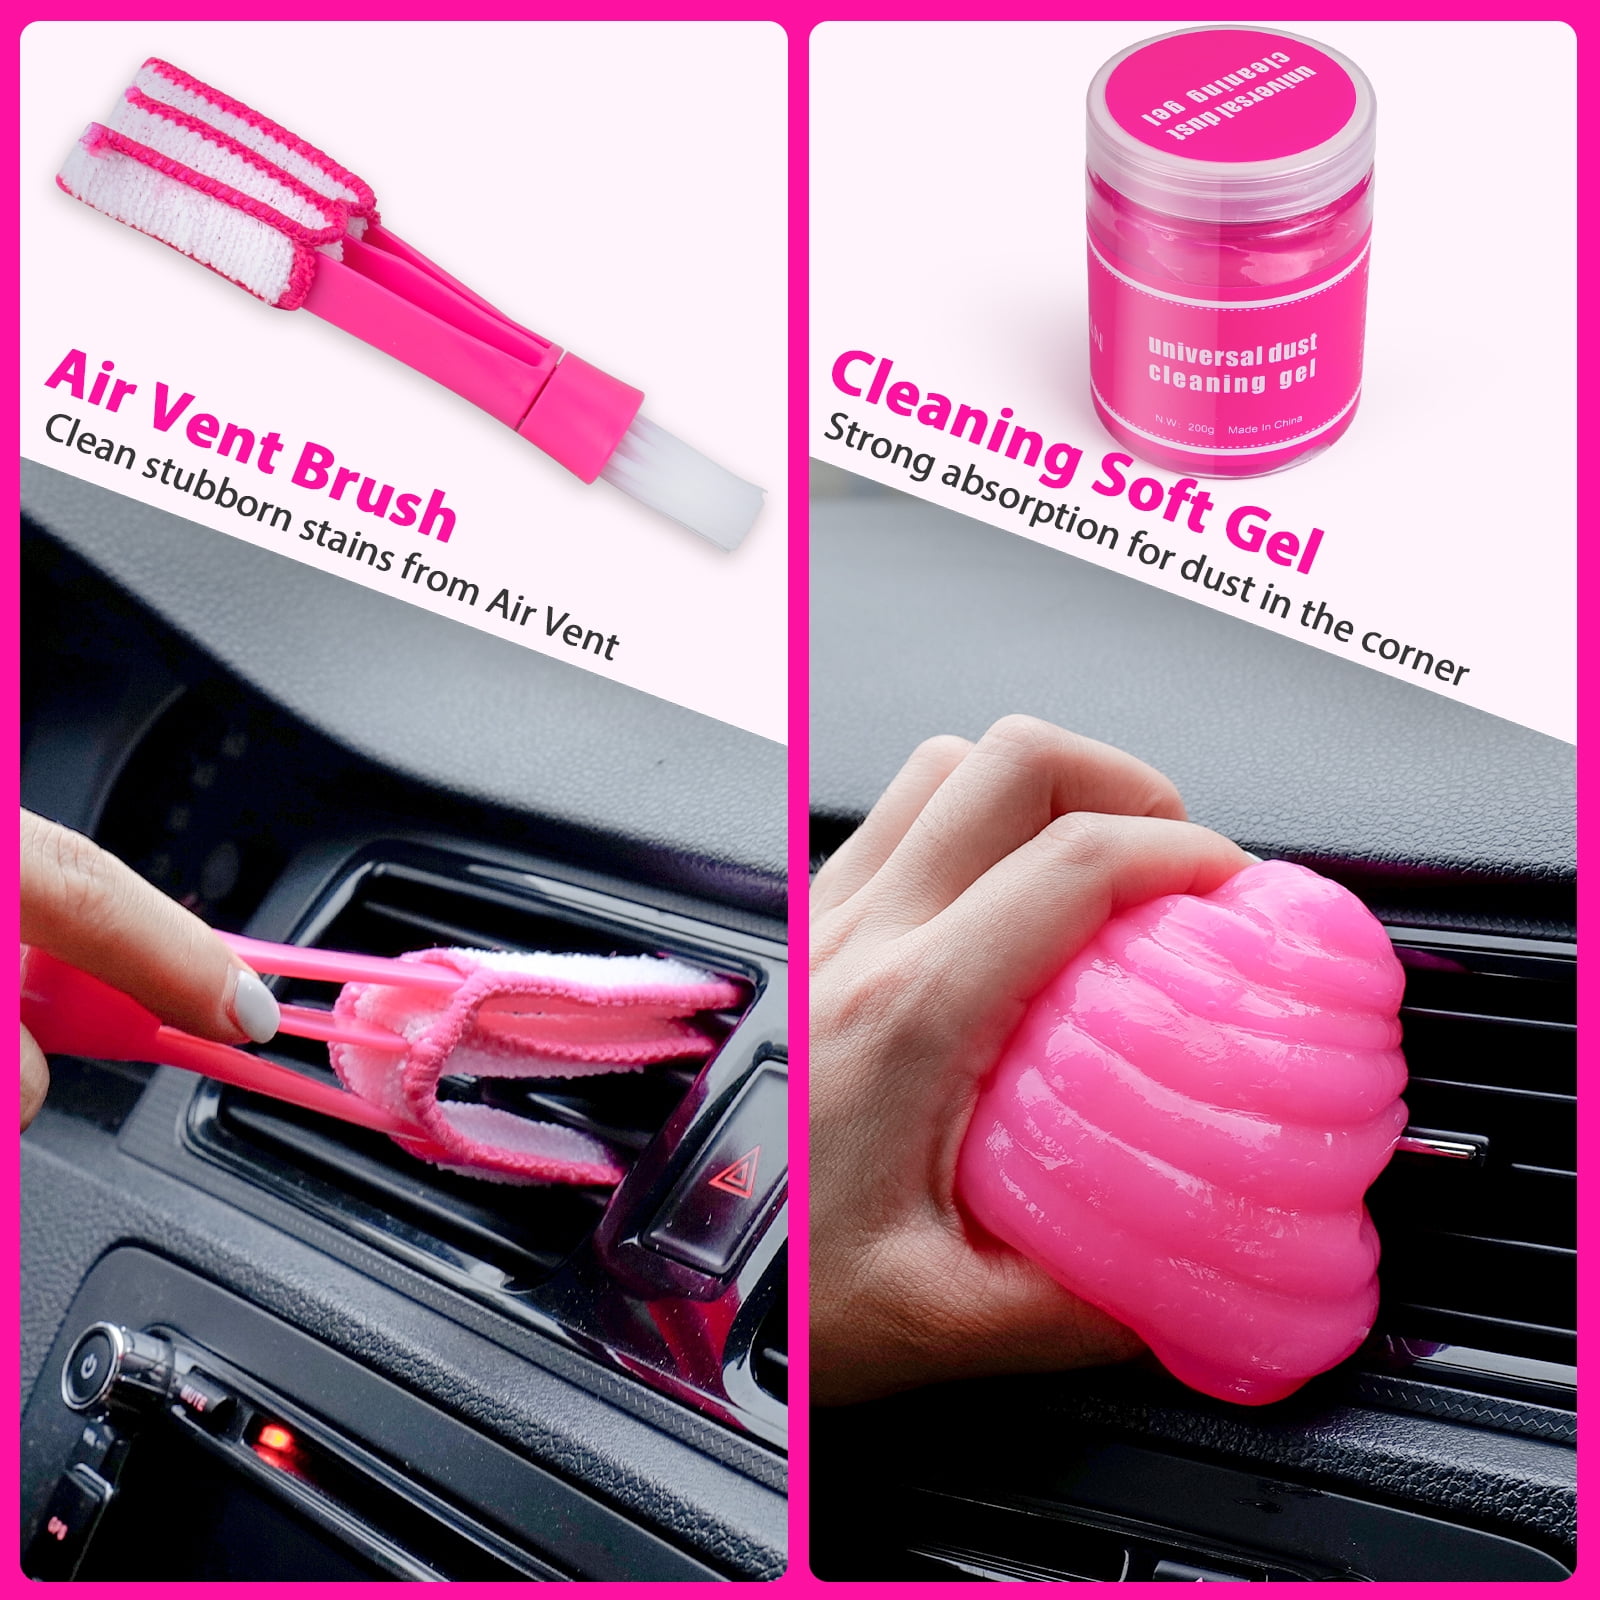  ThinkLearn Car Vacuum Detailing Kit, Interior Car Cleaning Kit  with High Power Handheld Vacuum and 7Pcs Detailing Brush Set, Well-Designed  Women's Pink Car Accessories Bag : Automotive